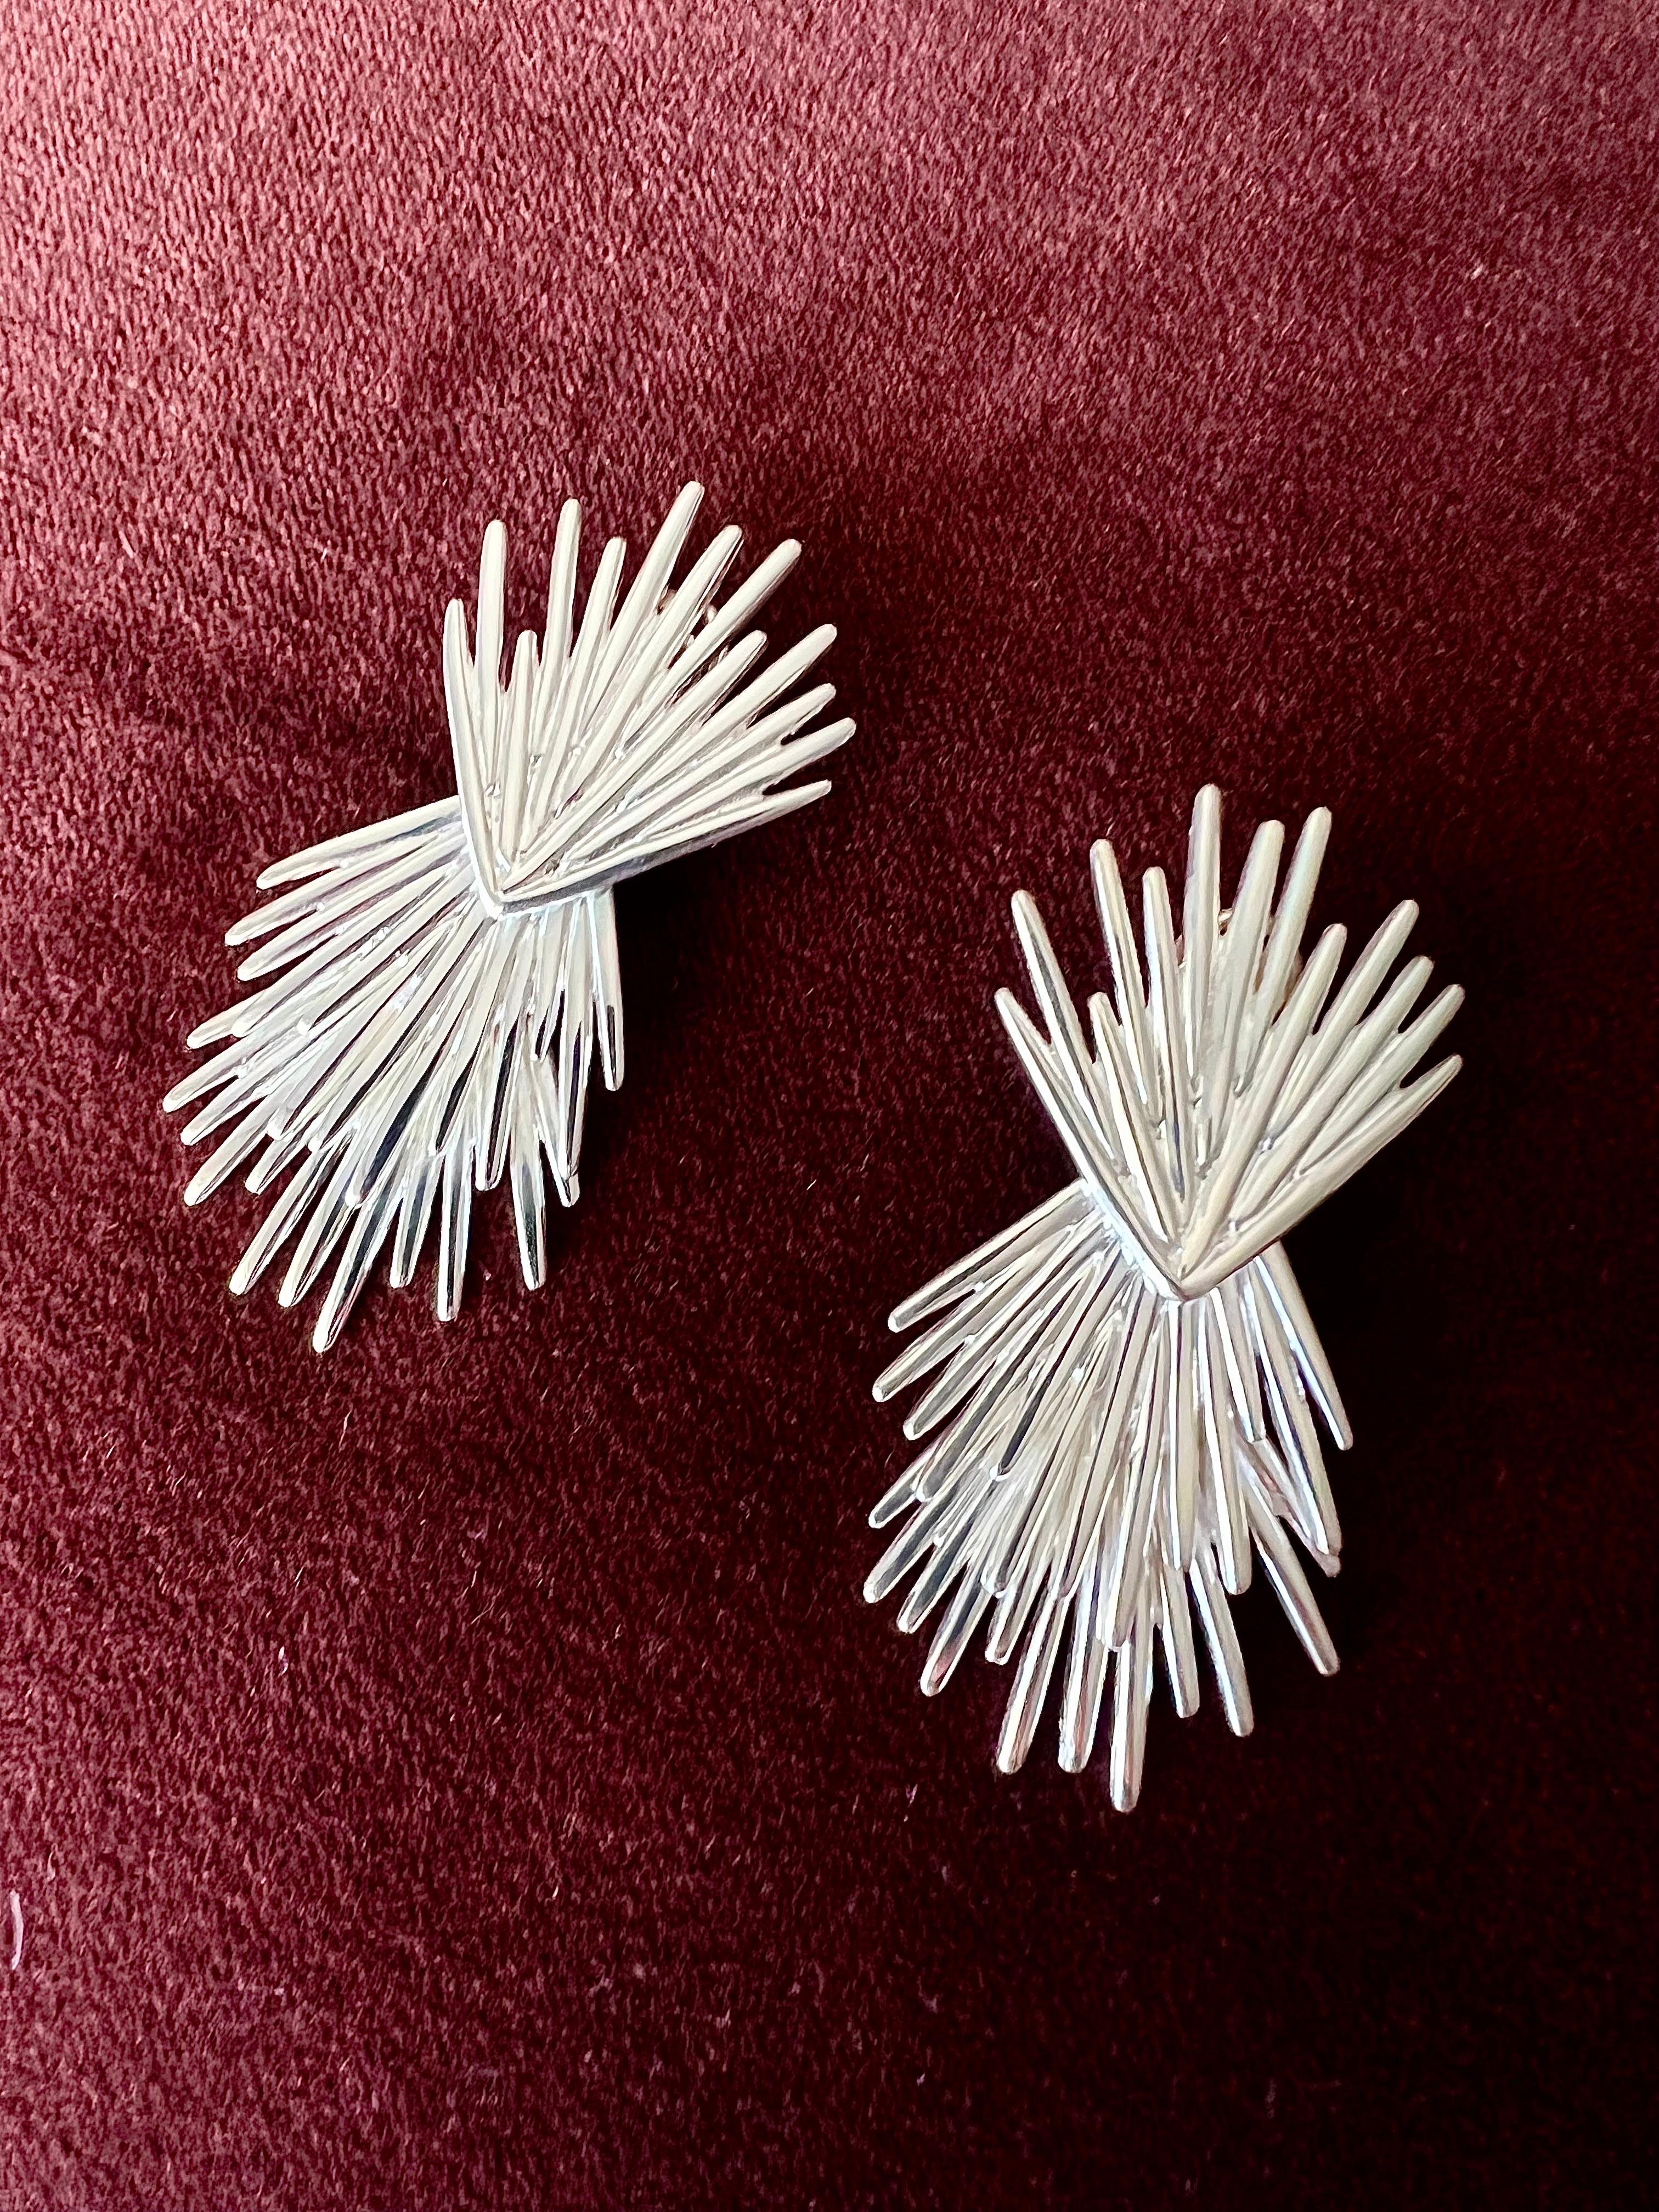 Michele Oka Doner
Vintage earrings in hallmarked sterling silver
Palmaceae Serie model, These are kinetic and dangle, move and sway gently like a palm branch. 
Set in 925 sterling silver, this unique work of art features an intricate palm tree